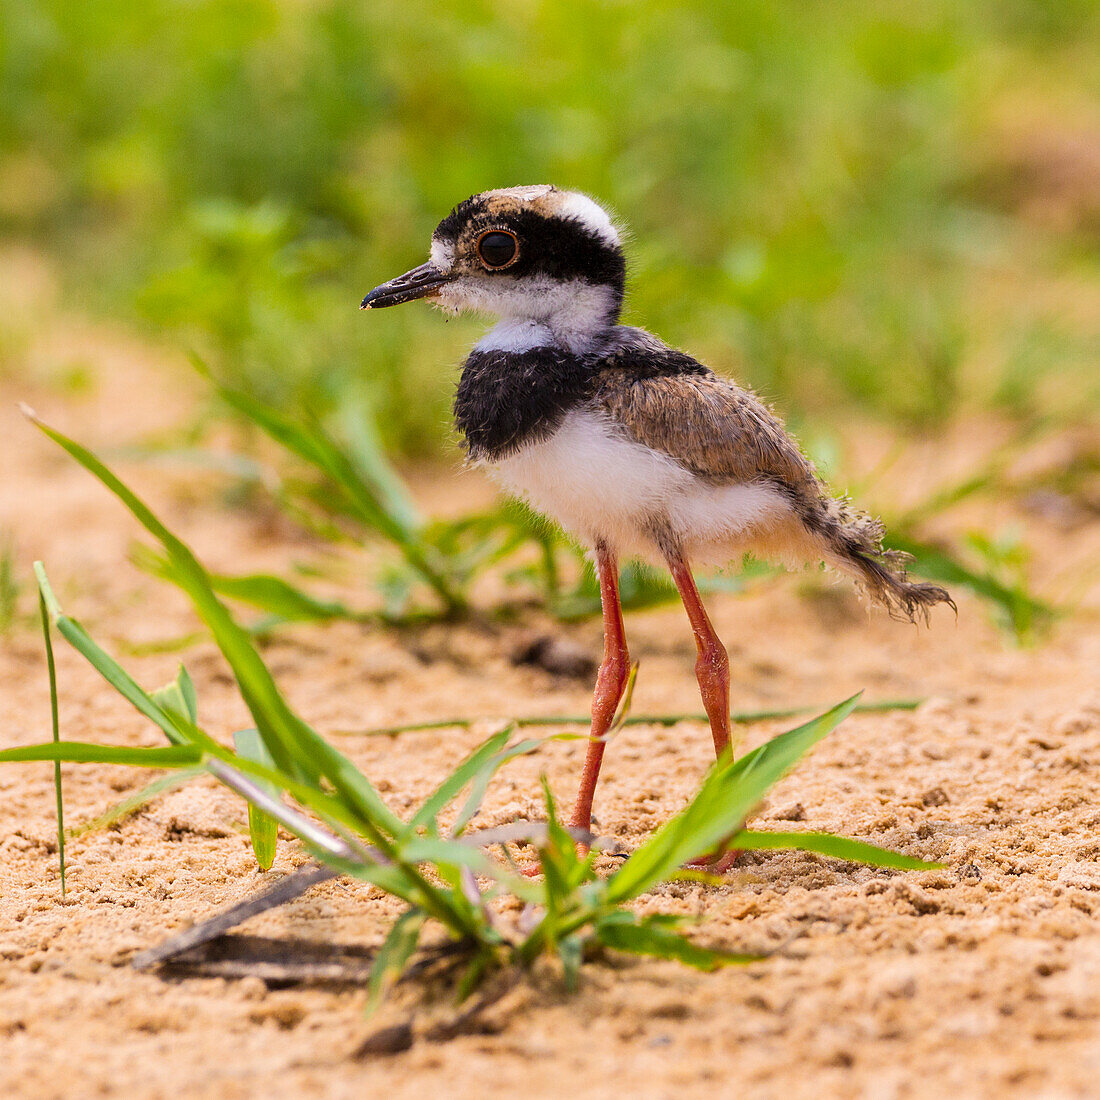 Brazil. A juvenile pied lapwing (Vanellus cayanus) along the banks of a river in the Pantanal, the world's largest tropical wetland area, UNESCO World Heritage Site.